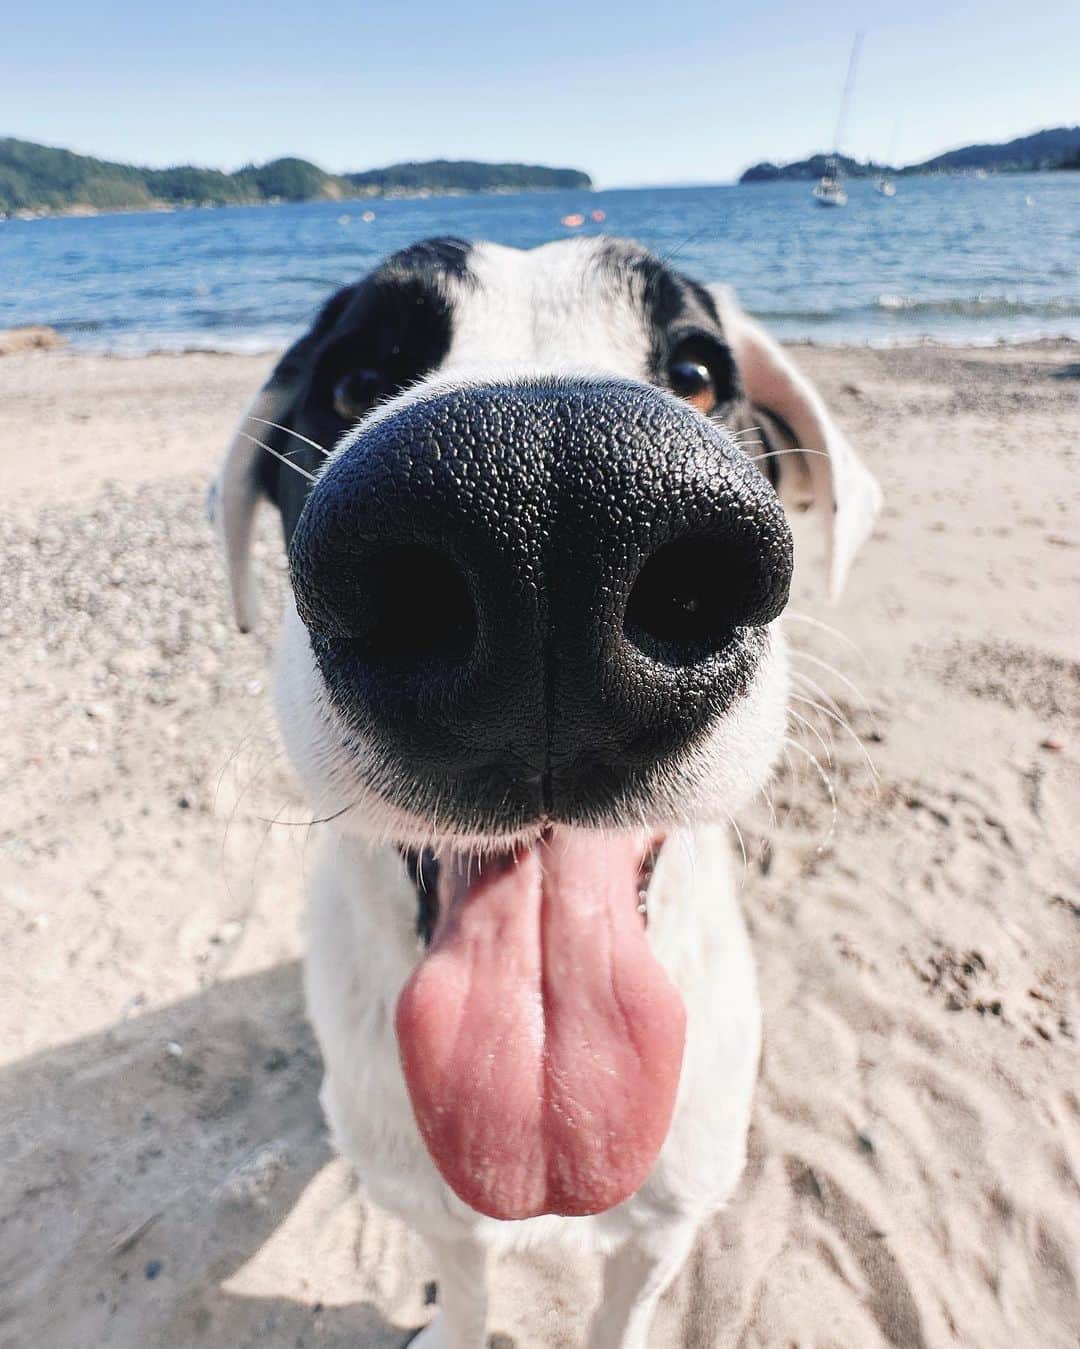 Andrew Knappのインスタグラム：「I cannot get enough of Boo’s face. And I cannot get enough of ultra wide photos of him.   Sharing on the feed so this lives on for eternity. Please share your ultra wide photos of your dog with me. Thx.」